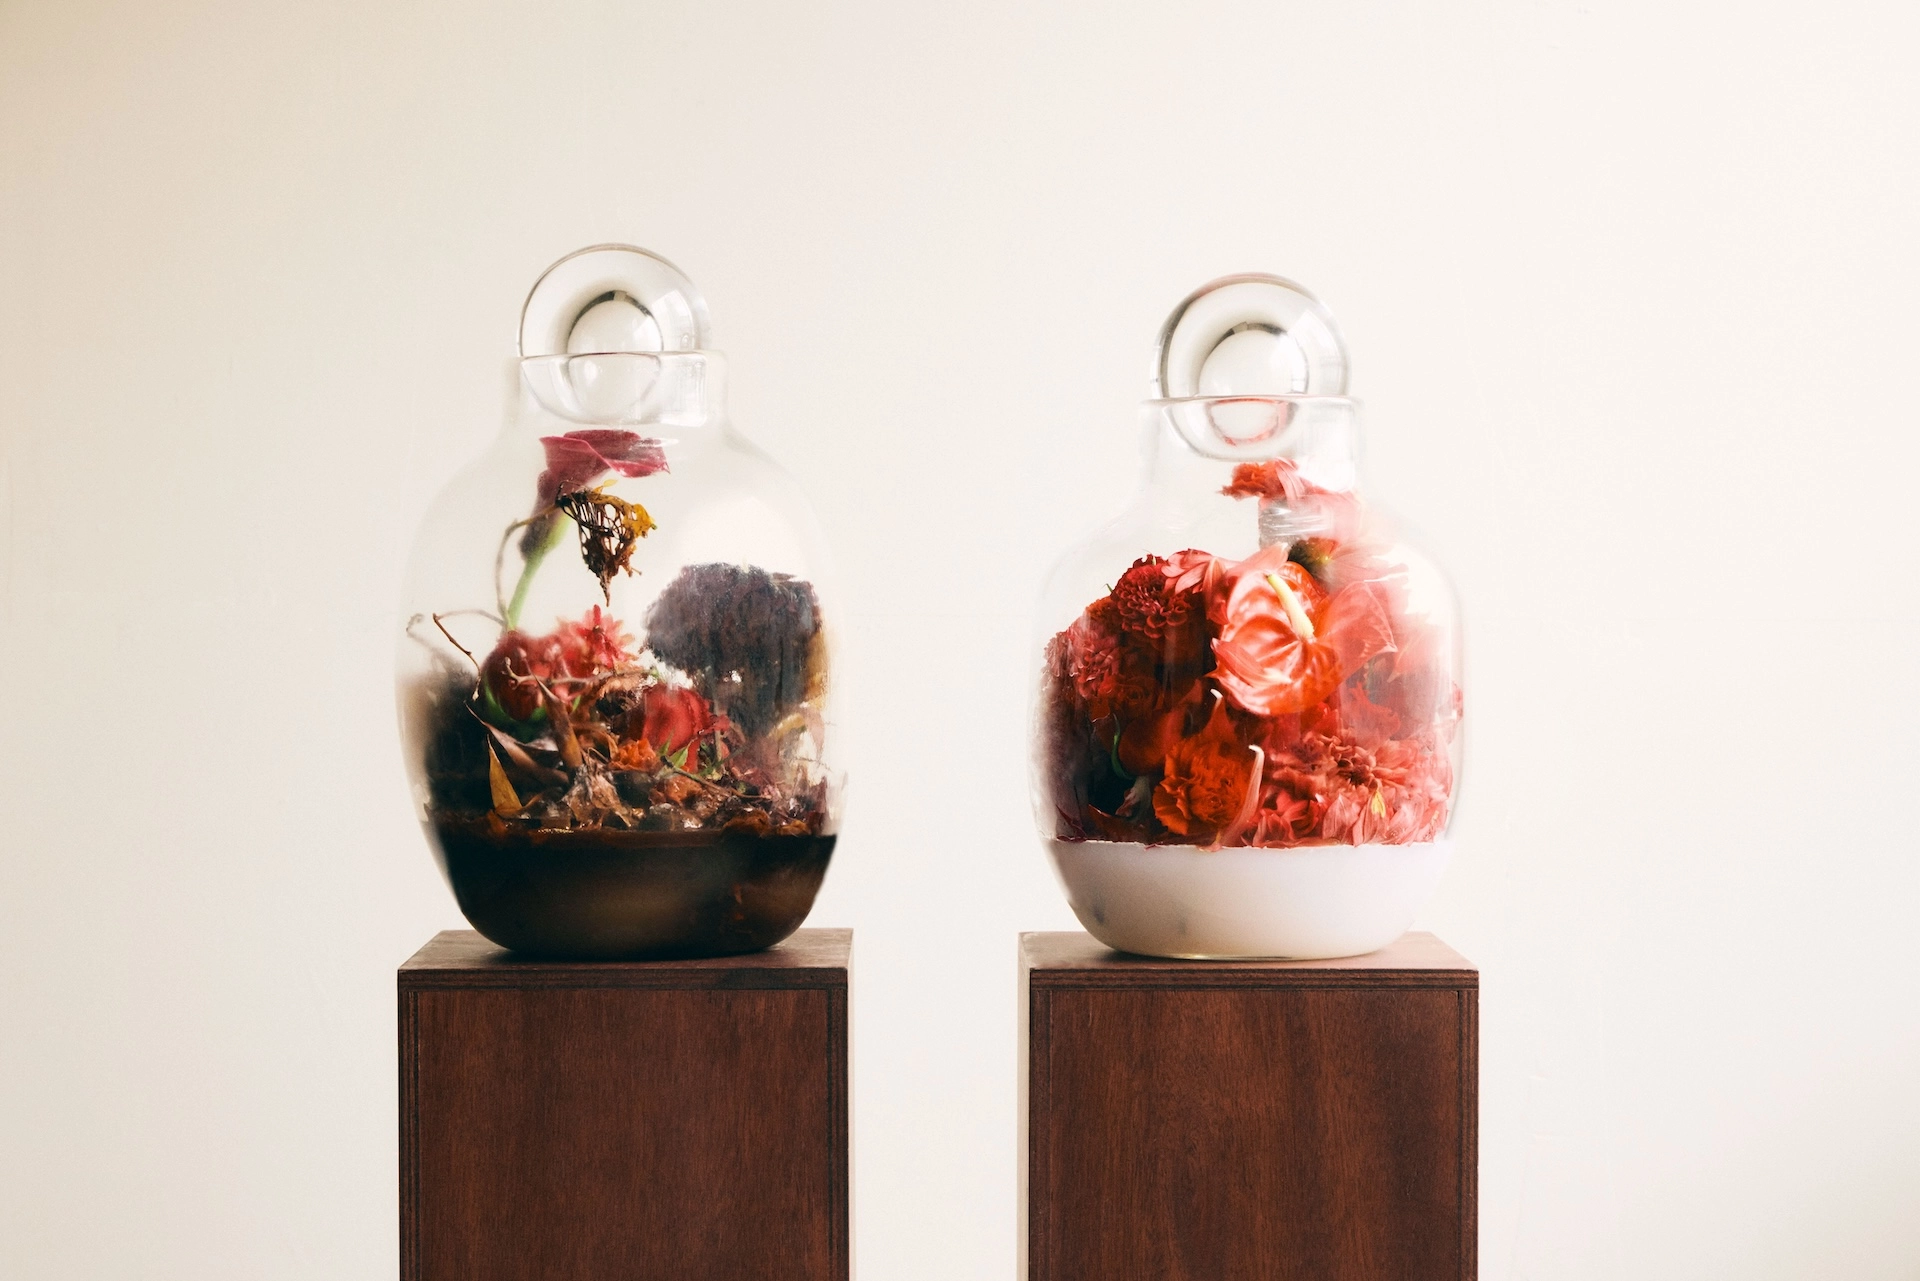 Arrangement of red flowers in two glass vessels. The vessel on the left holds withered flowers and leaves, and the container on the right is filled with vibrant red flowers. Both vessels are placed on wooden platforms.